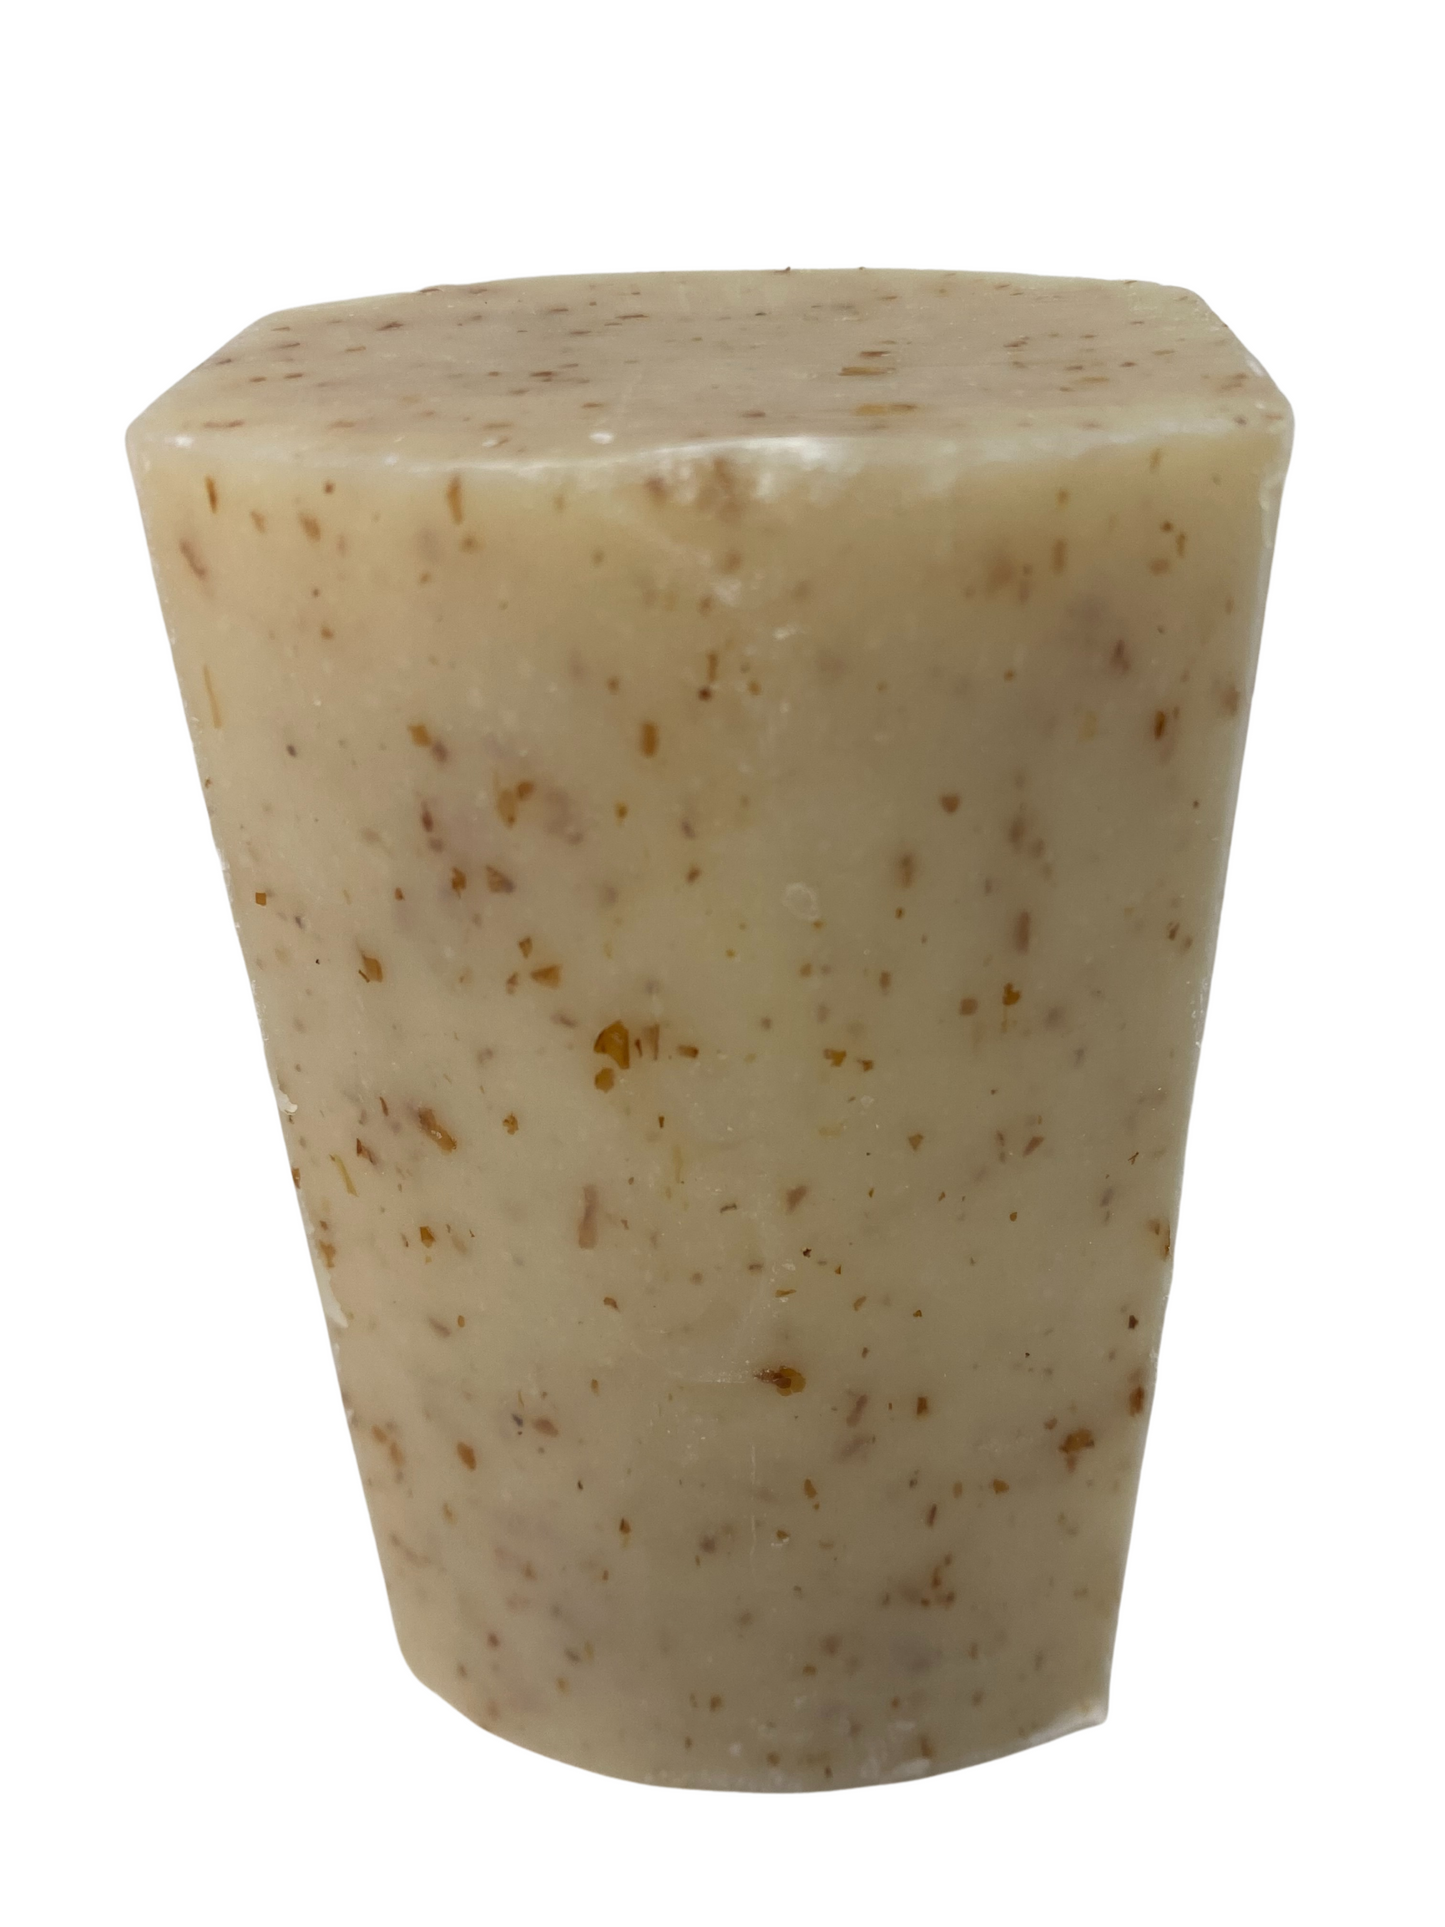 Exfoliating soap made with natural ingredients prevents acne blackheads removes dead skin cells improves skin radiance and clarity.  200g @ only $14.99